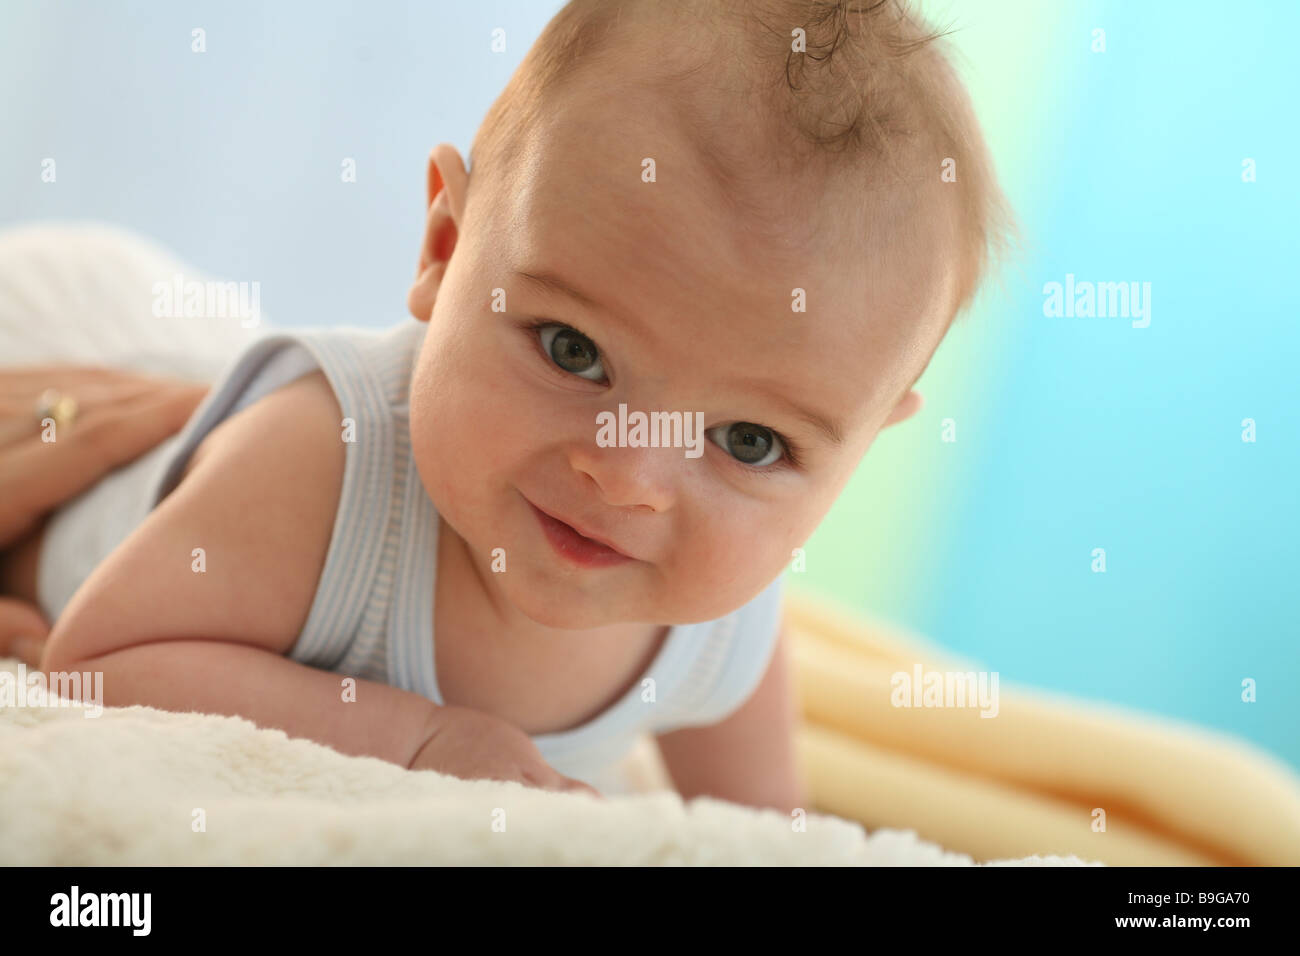 Baby lying prone position poor rest head portrait lifts 5 months poor rest wakened alertly baby prone position gaze camera one Stock Photo